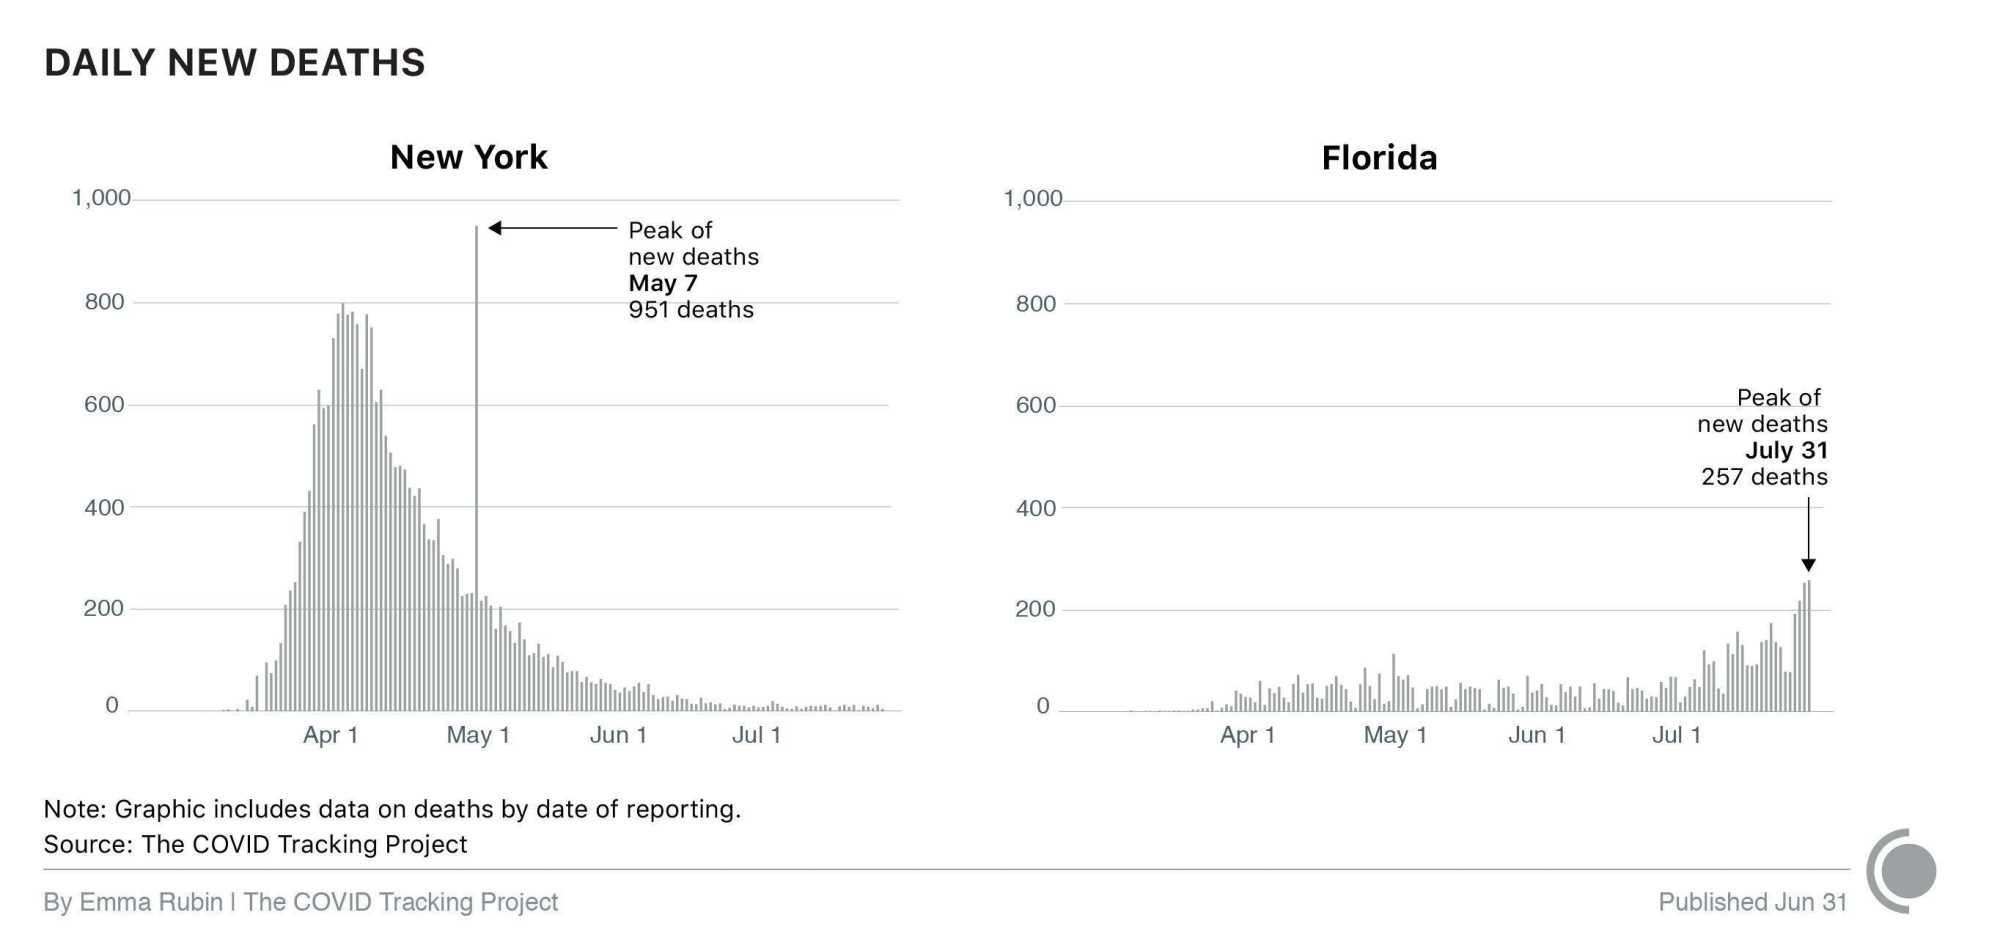 Charts showing daily new deaths in New York and Florida, from March through July, 2020.